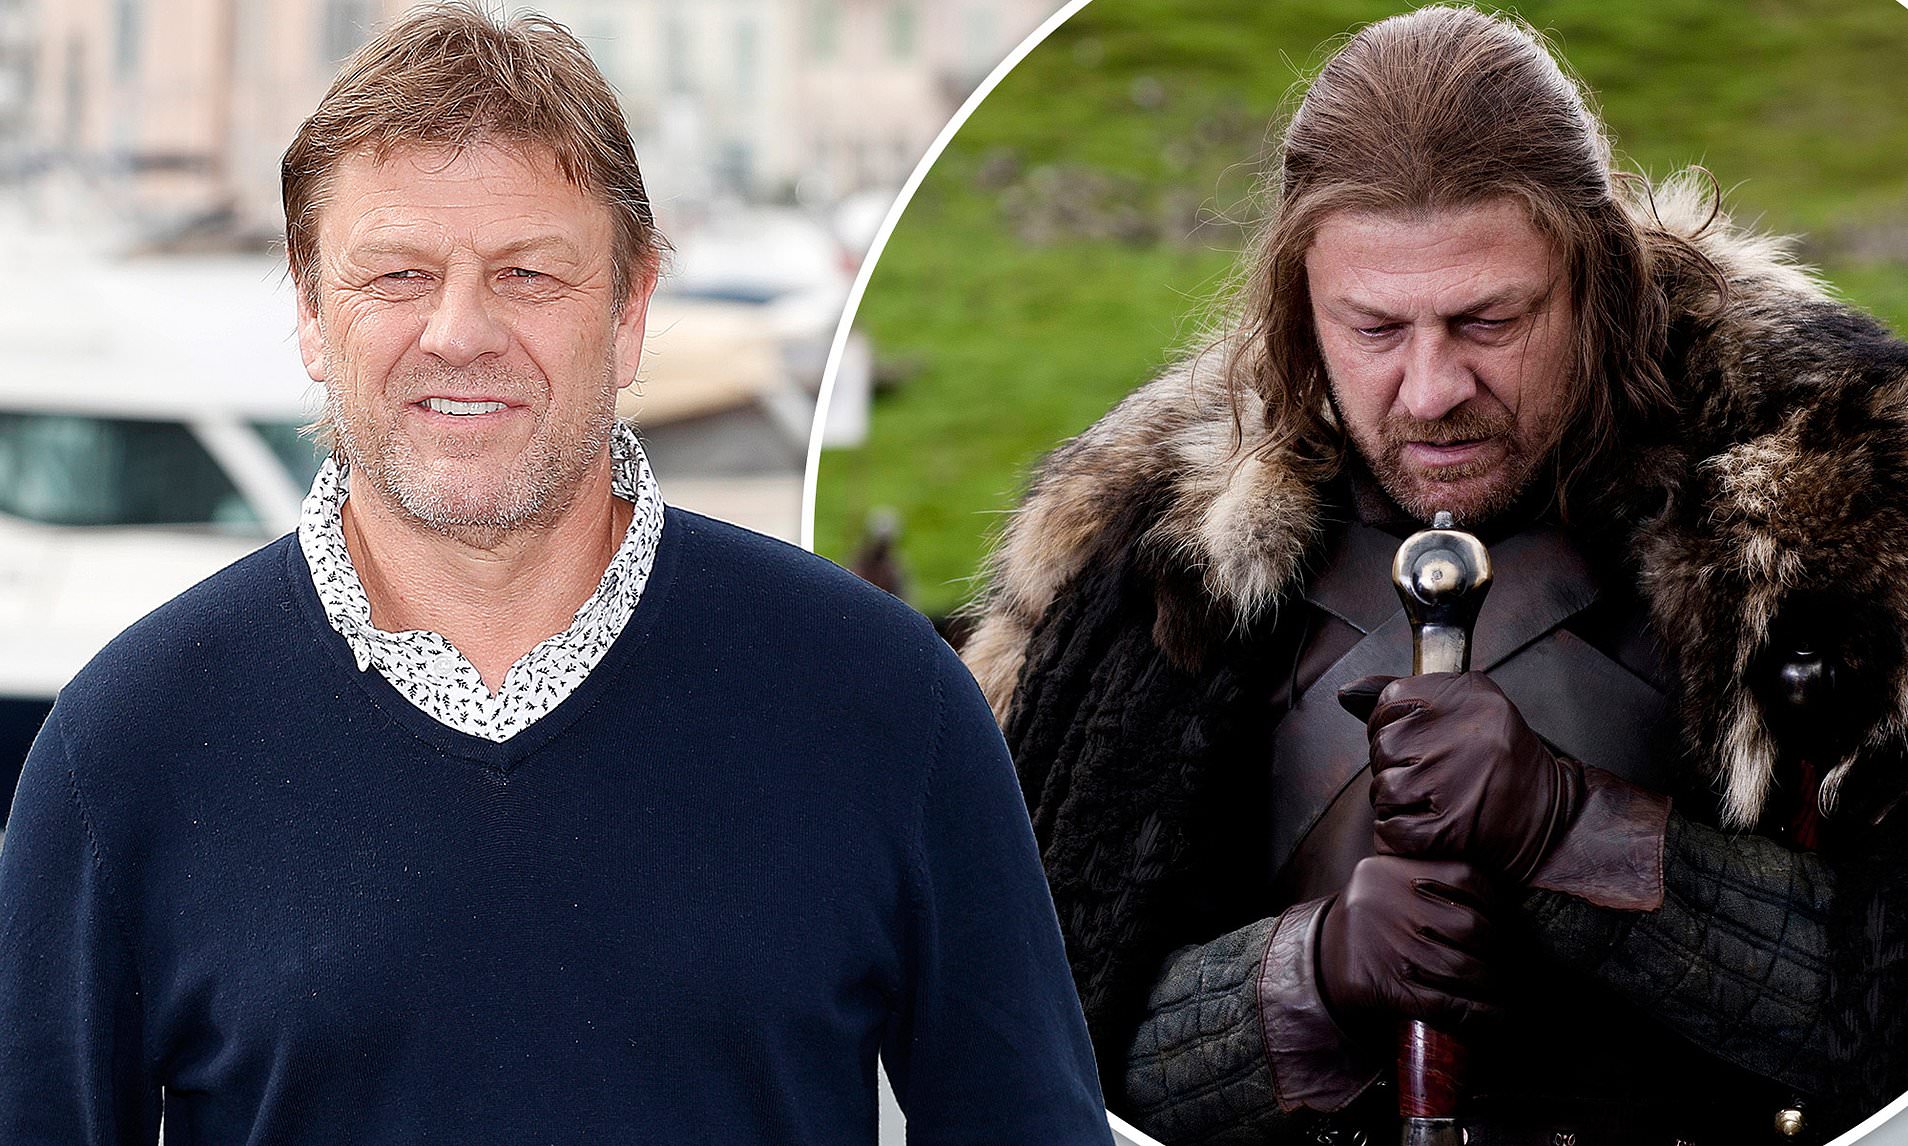 Sean Bean Swaps Heroics for Harsh Reality in New Film 'The Yellow Tie' with John Malkovich